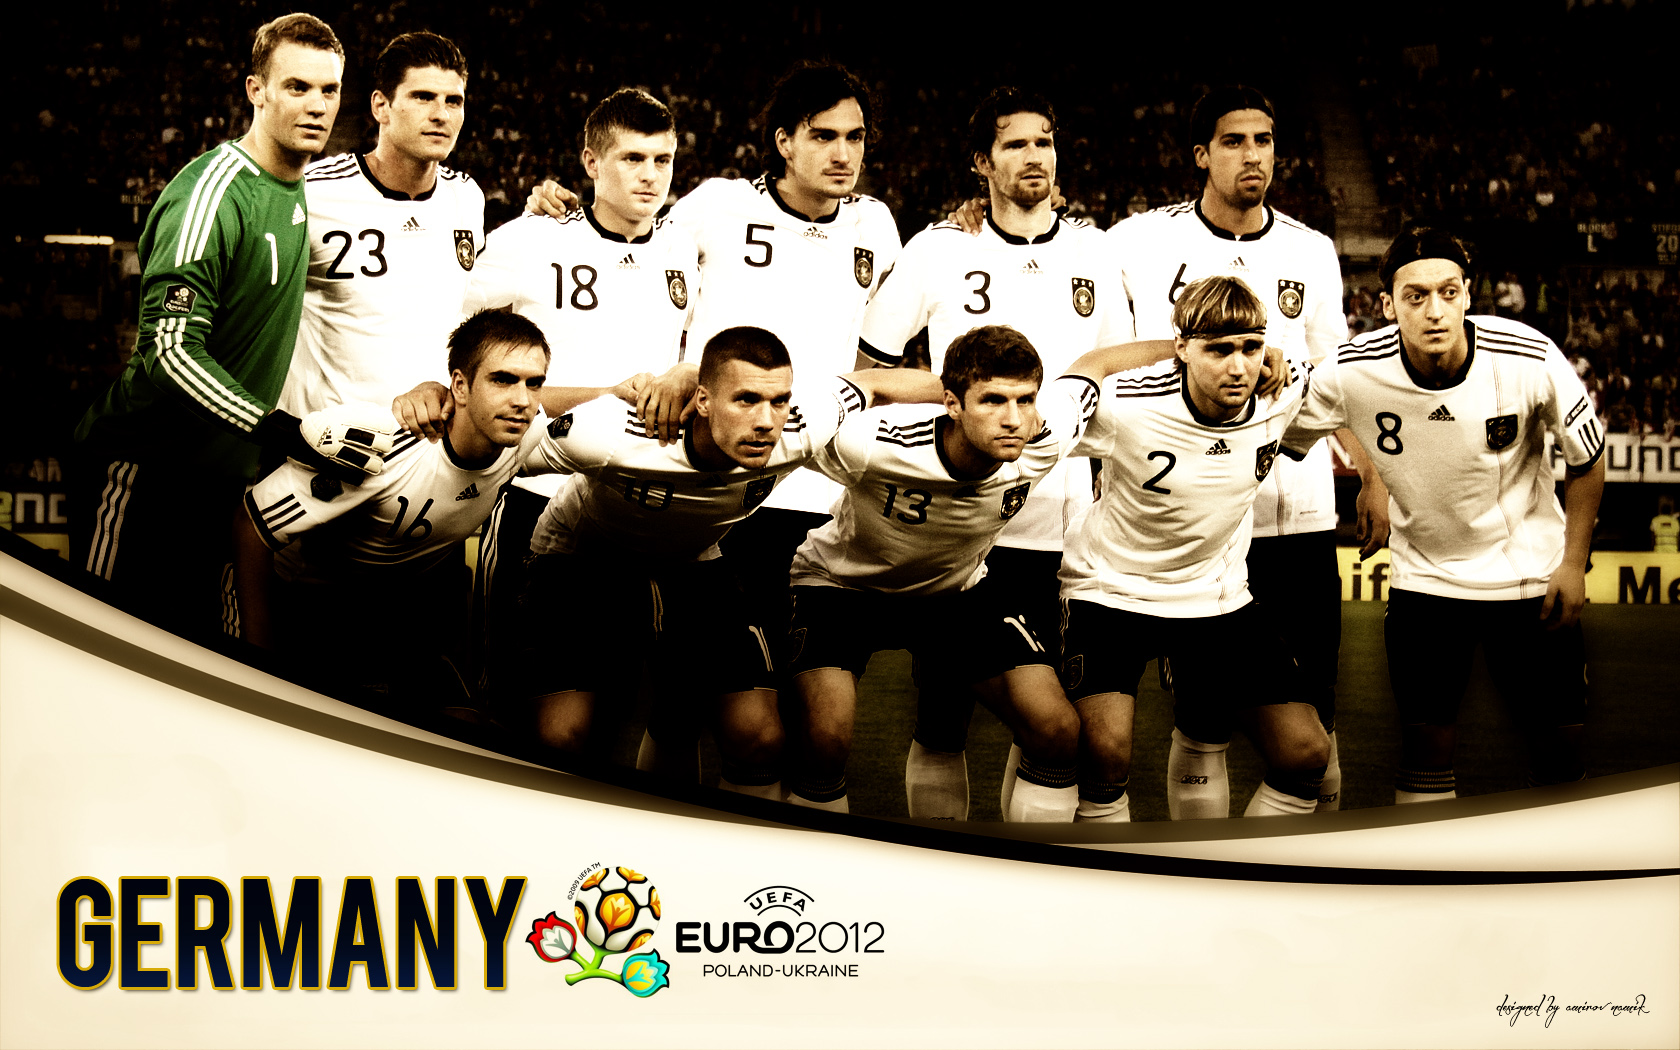 Germany National Football Team Picture by Namik Amirov